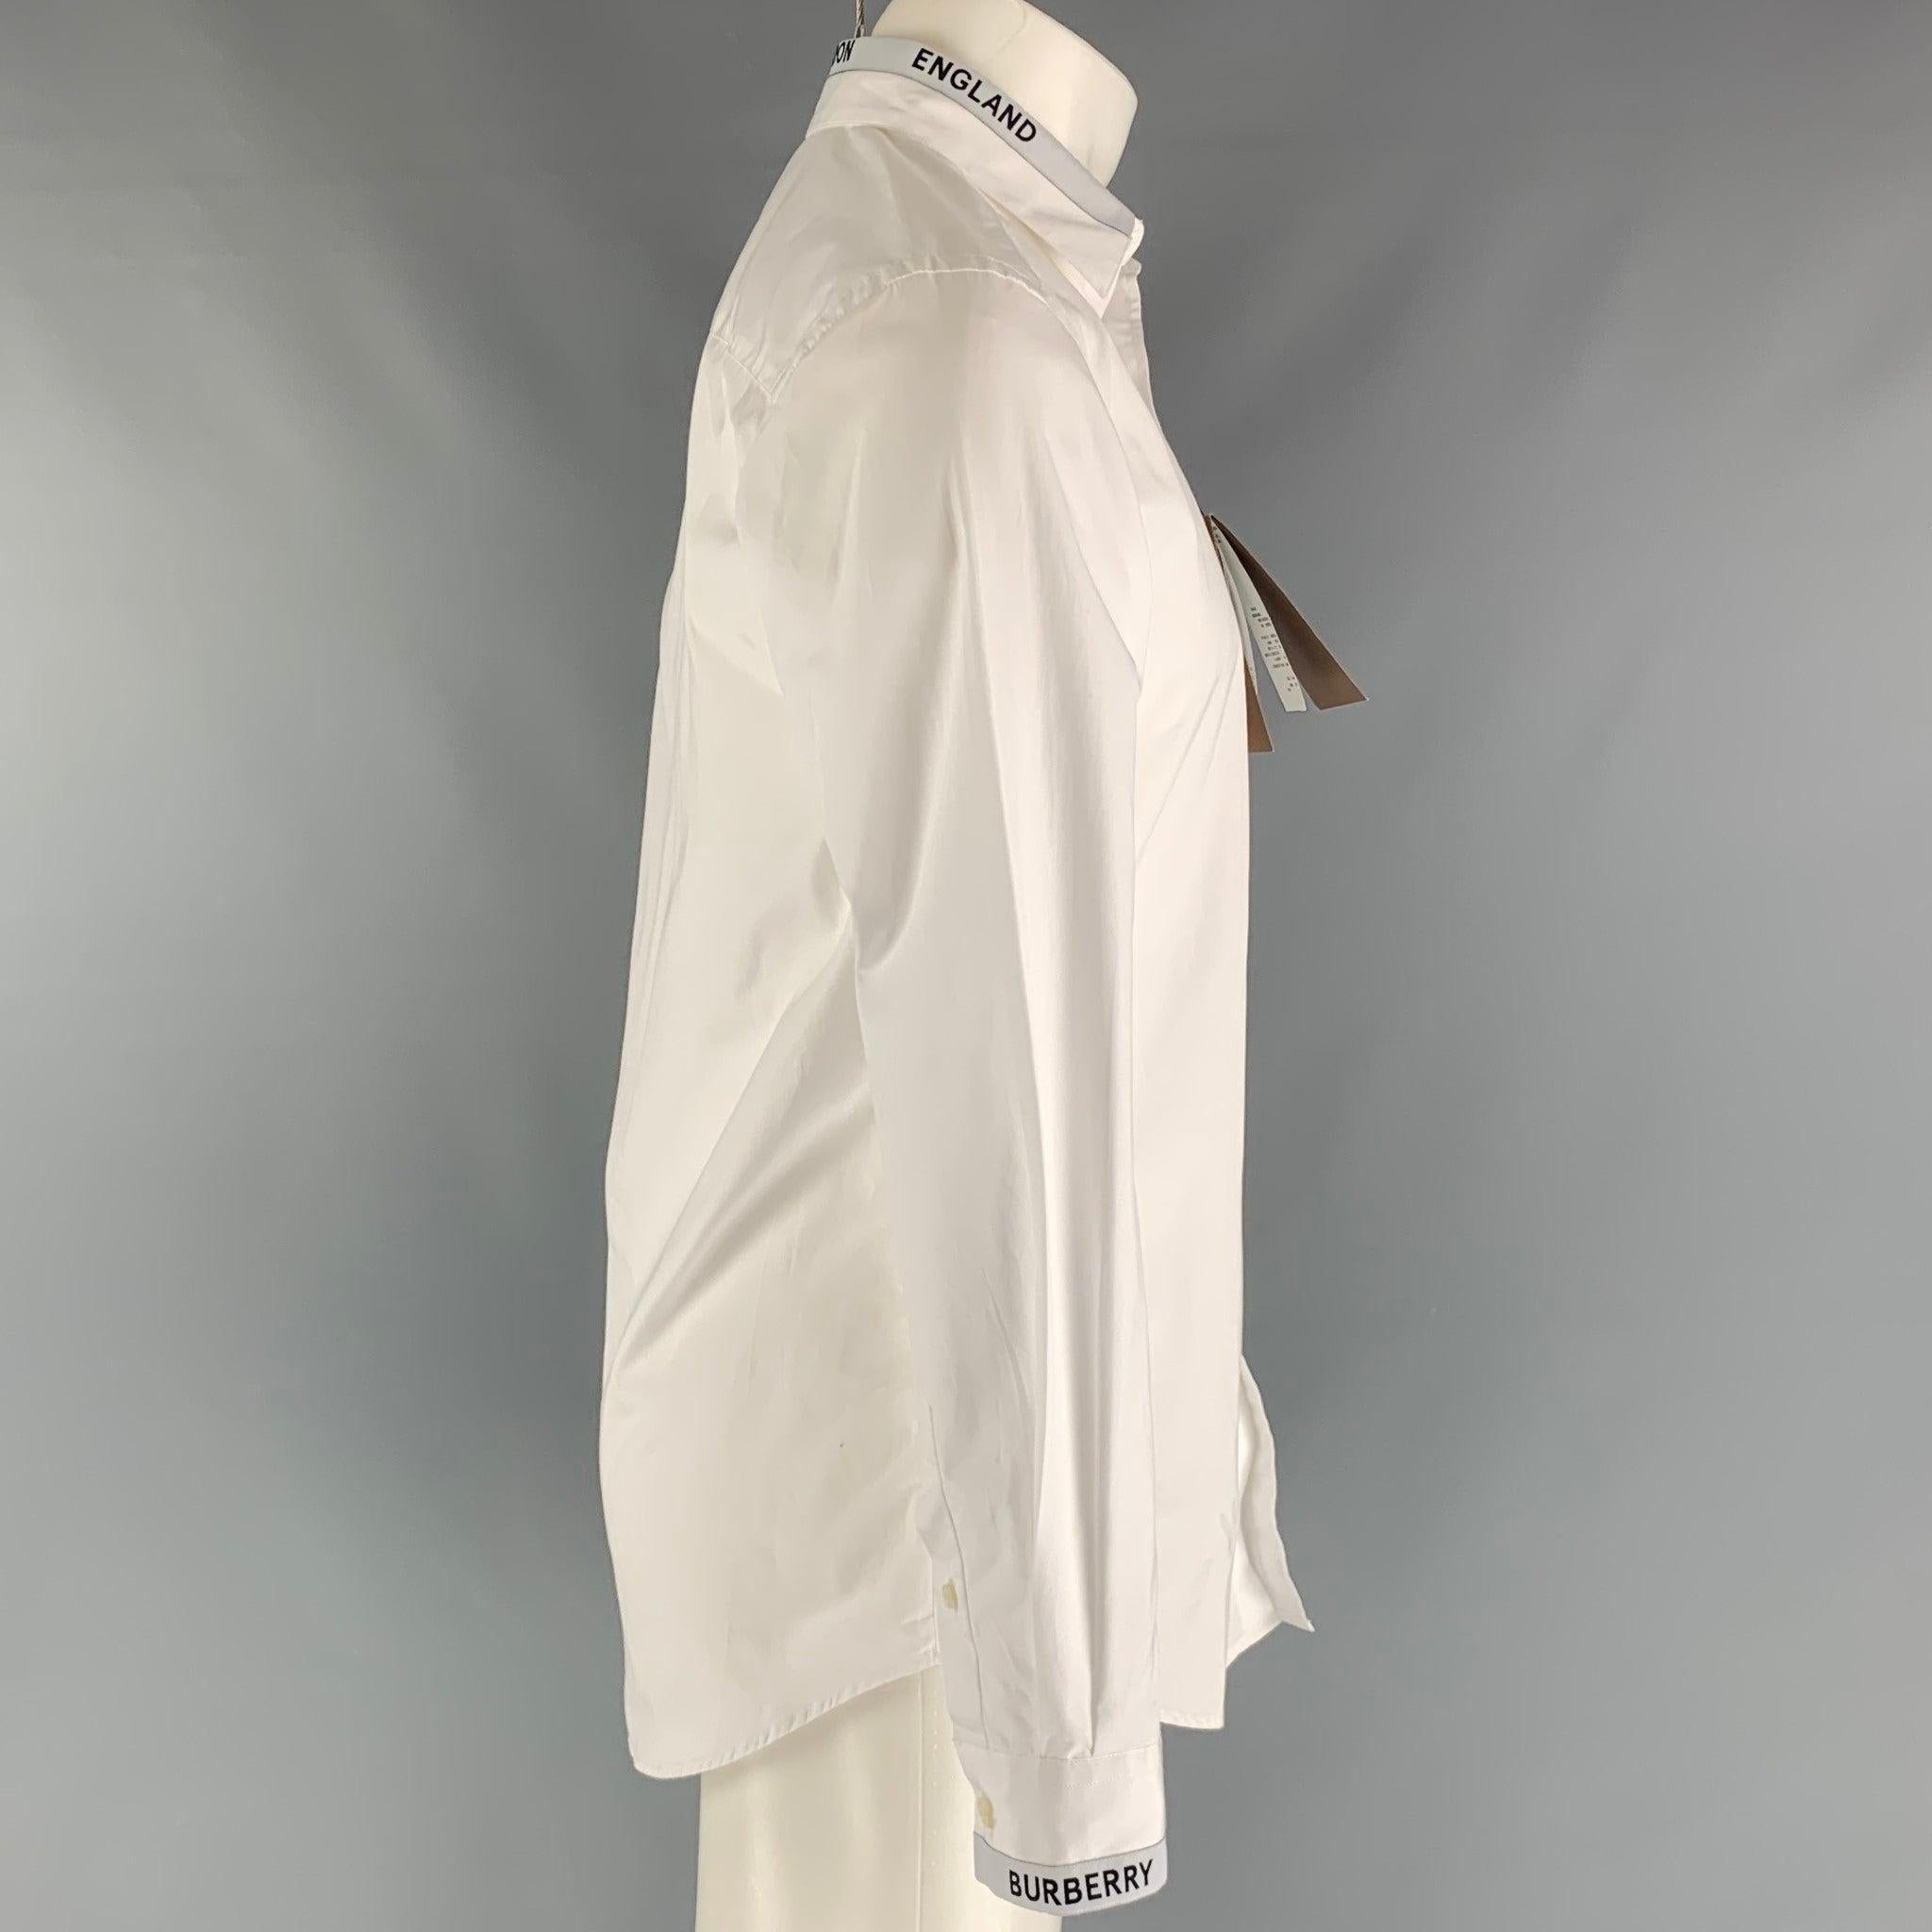 Burberry by Ricardo Tisci long sleeve shirt comes in a white cotton featuring straight collar, Burberry London trim at collar and sleeve cuffs, and buttons closure. Made in Portugal.Very Good Pre-Owned Condition. With Tags. Moderate marks. 

Marked: